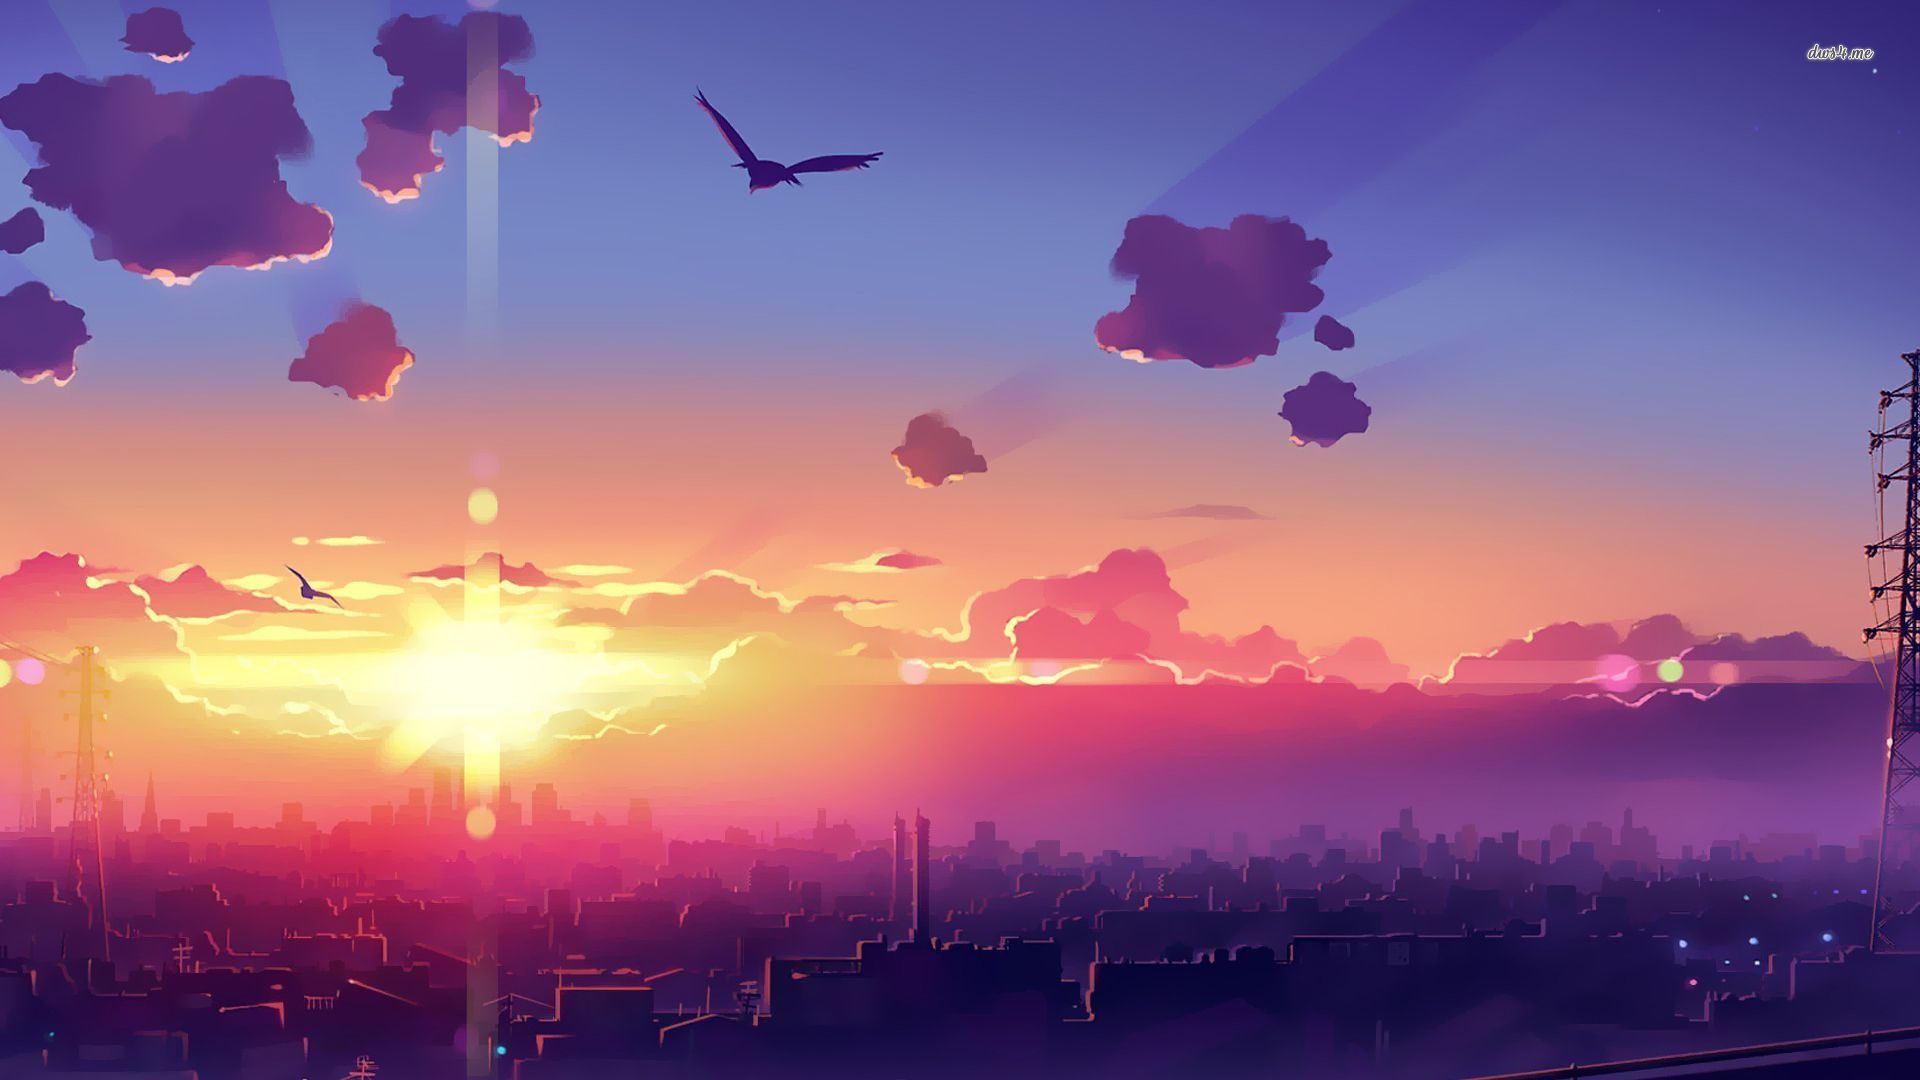 Amazing sunset above the city wallpaper - Anime wallpapers - #41068